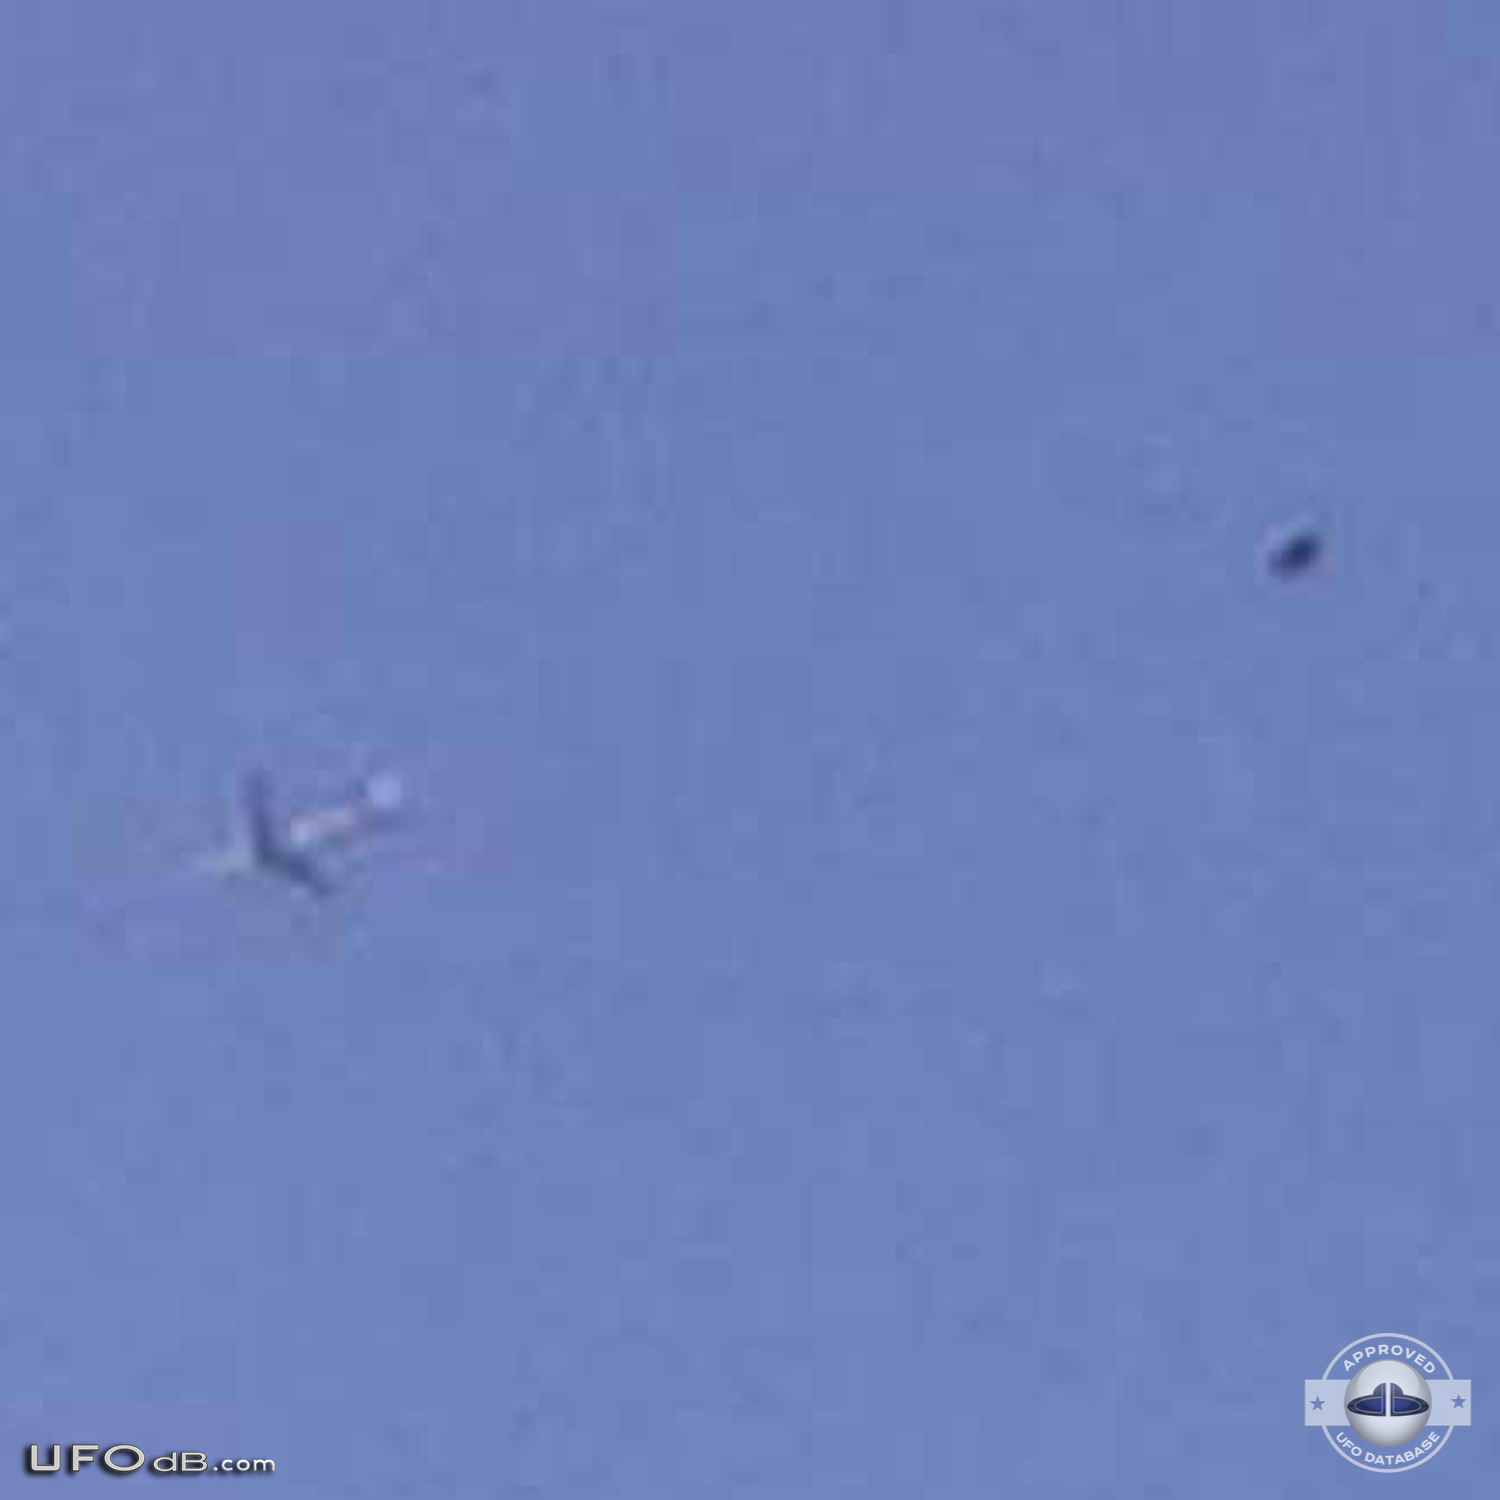 Newyorker with 170 ufo sightings gives us ufo pictures to prove it UFO Picture #401-3